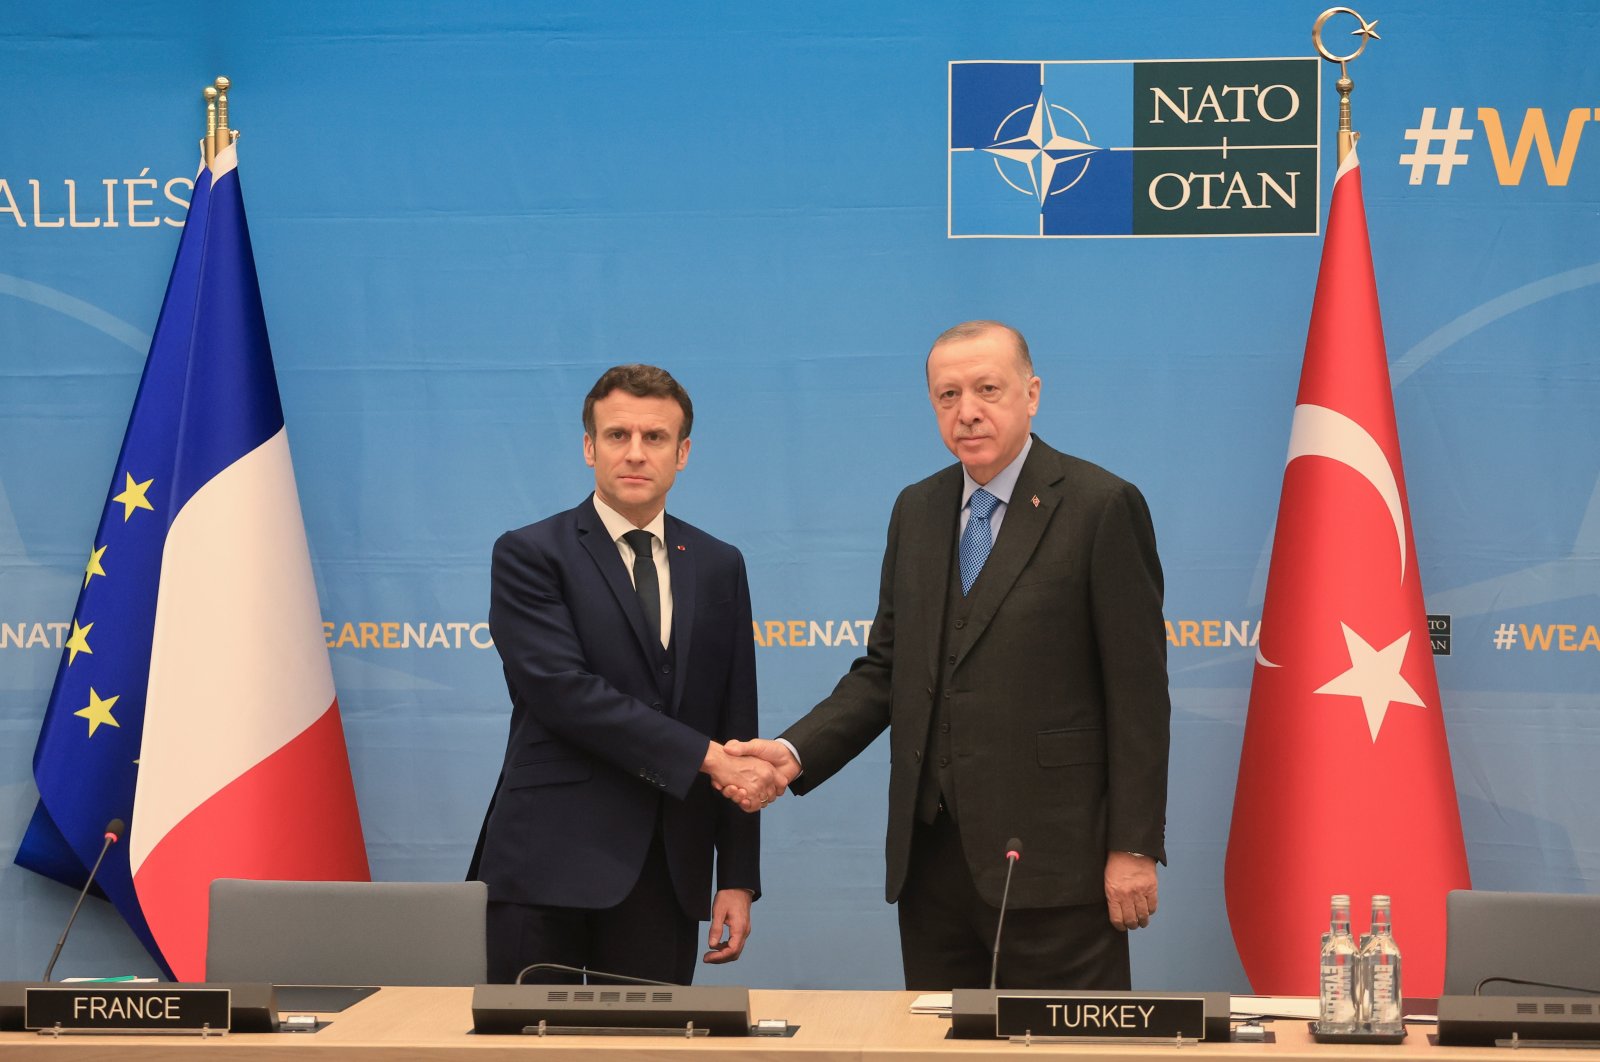 President Recep Tayyip Erdoğan and French President Emmanuel Macron shake hands as they attend a bilateral meeting ahead of a NATO summit to discuss Russia's invasion of Ukraine, at the alliance's headquarters in Brussels, Belgium, March 24, 2022. (Reuters File Photo)